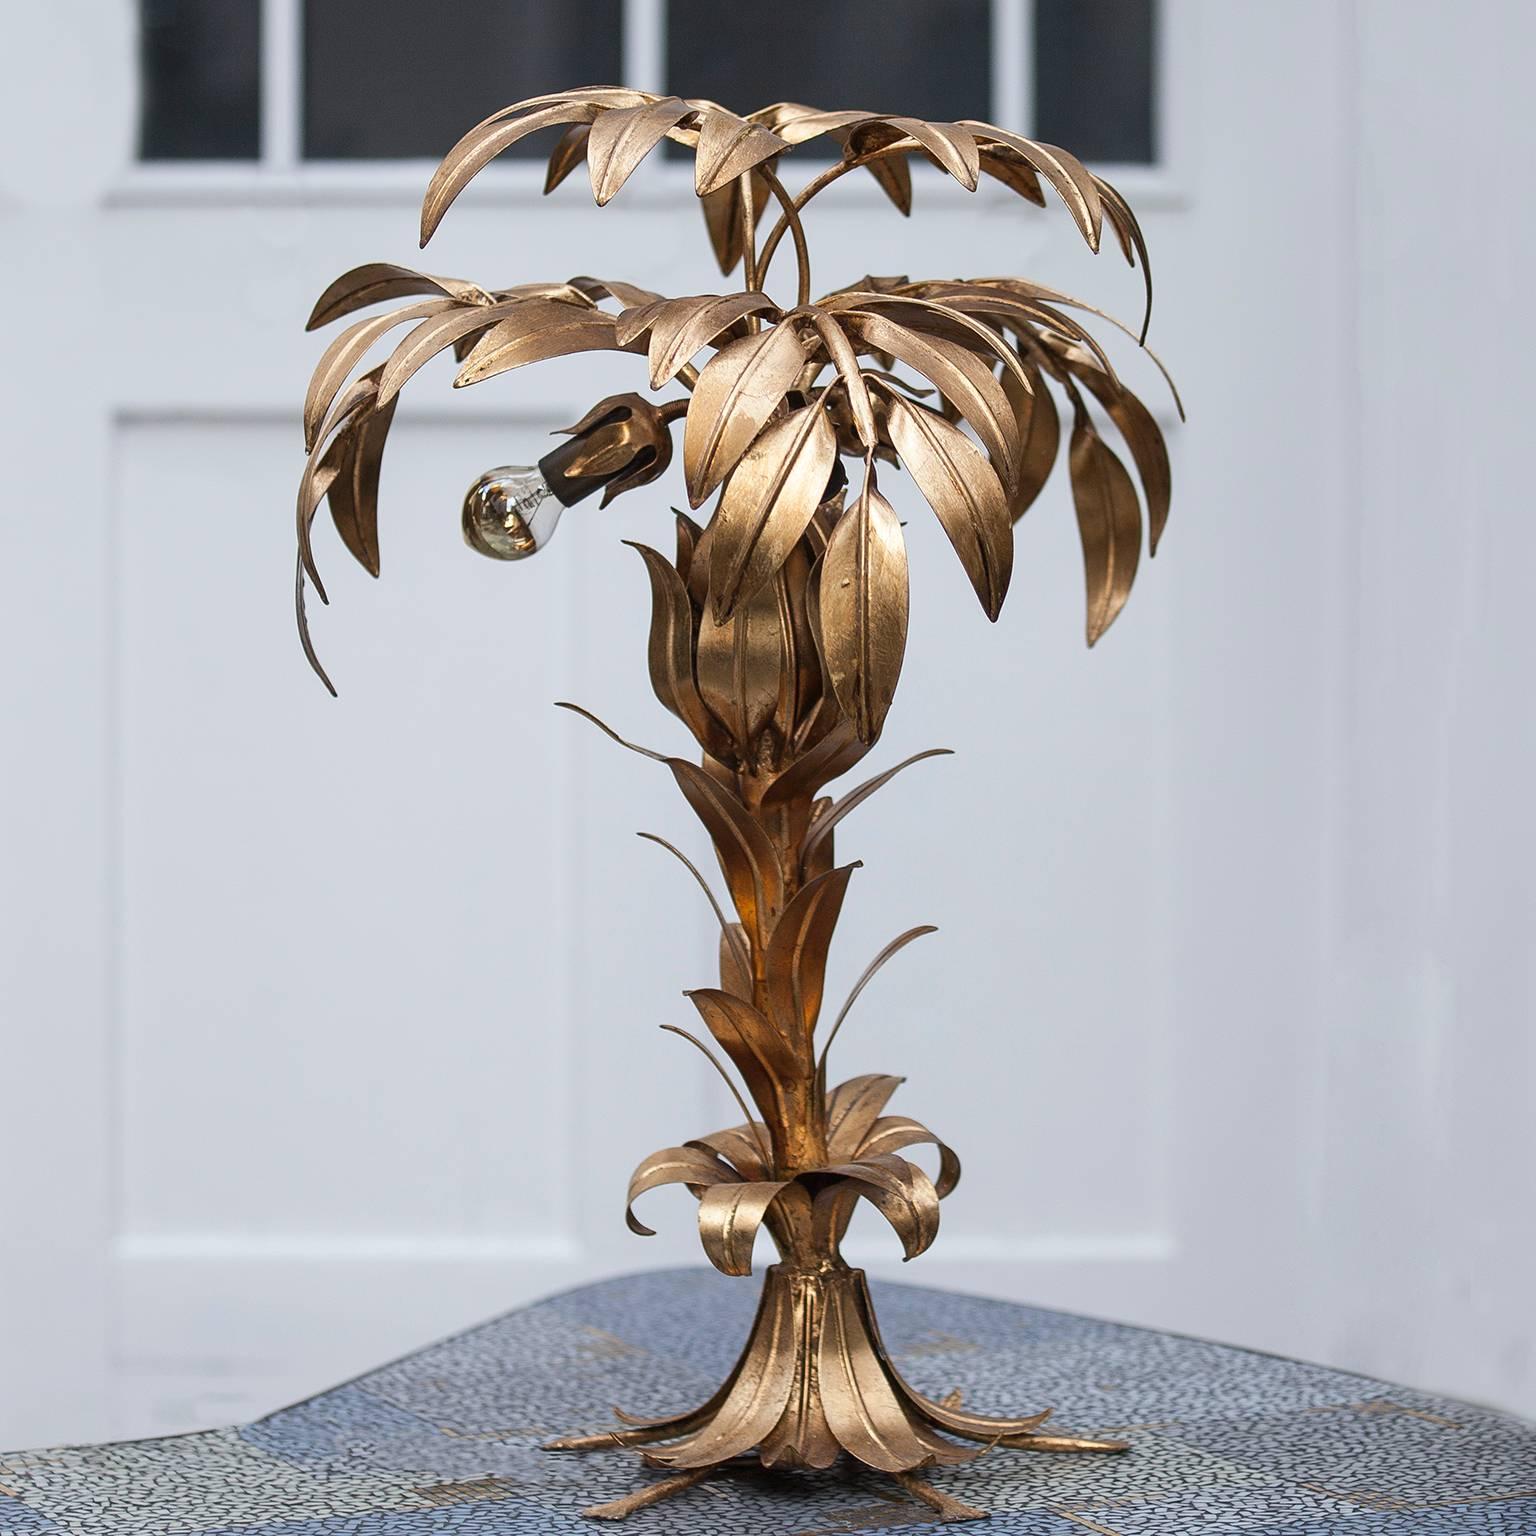 Exceptional beautifully patinated copper palm tree table lamp by German Baroque designer Hans Kogl (Koegl) with three-light sockets.
Amazing eye-catcher in any Brutalist style Mid-Century interior.